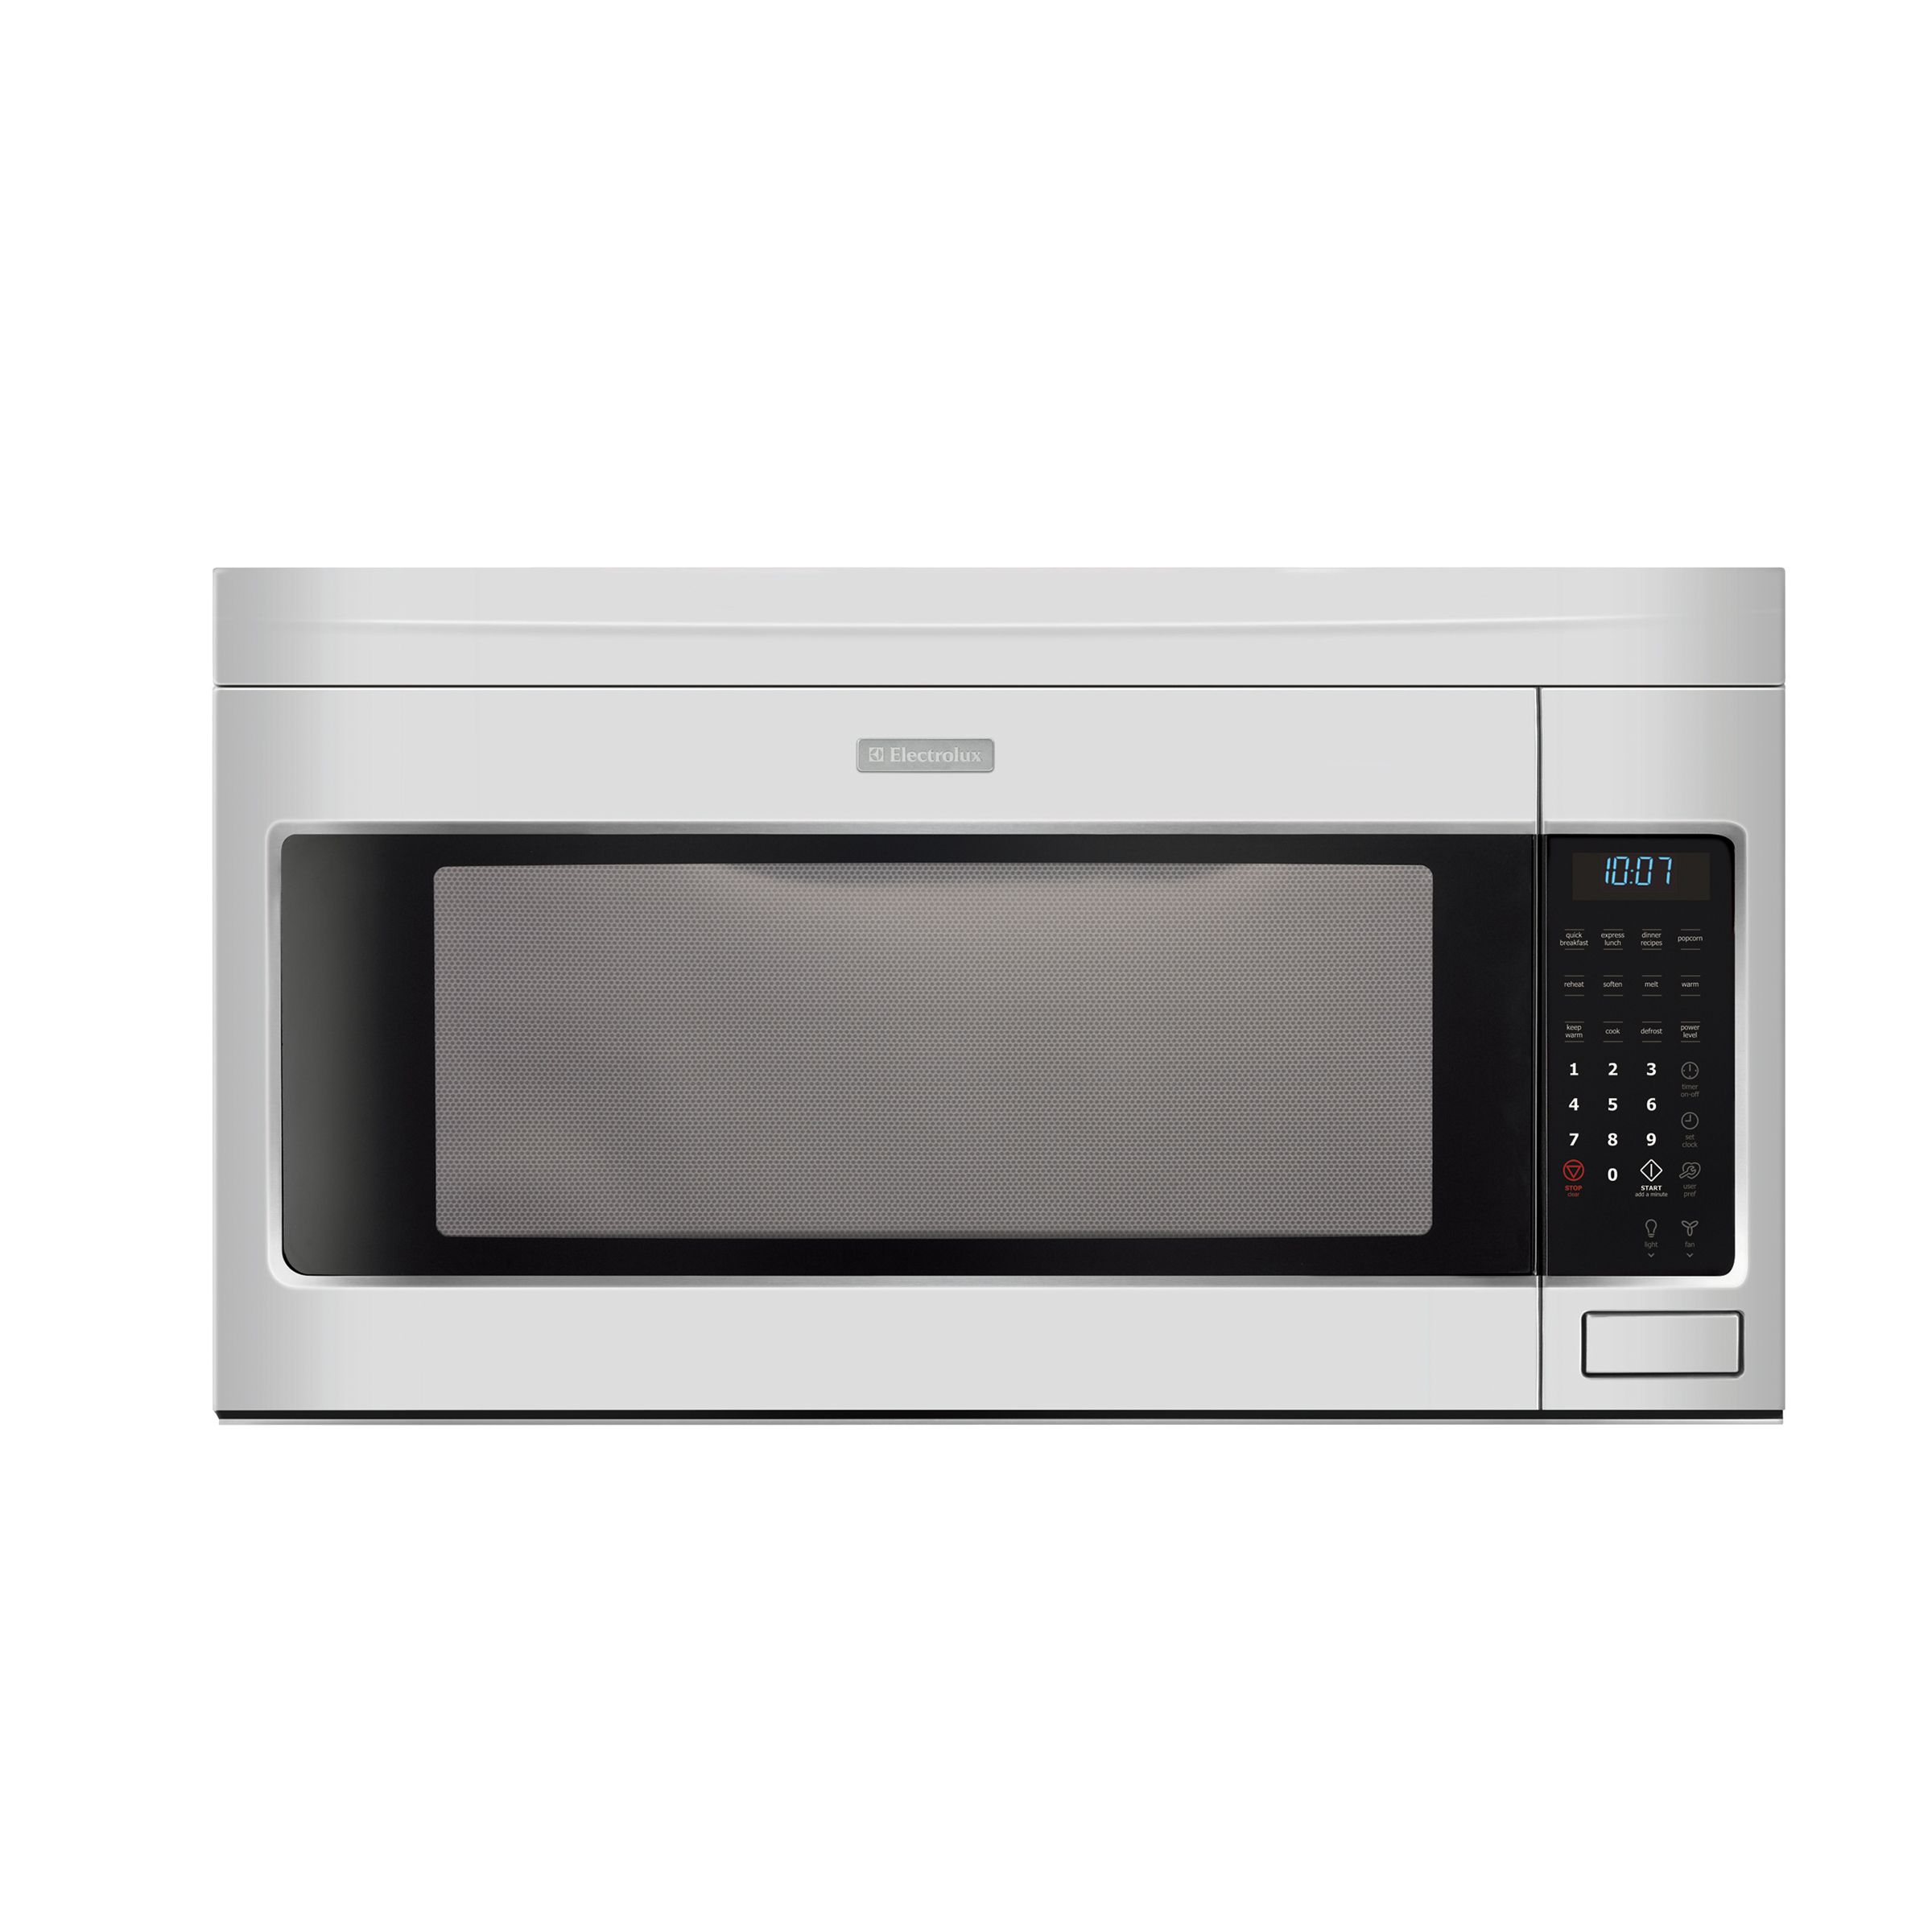 Electrolux Over the Range Microwave 2.1 cu. ft. EI30MH55G - Sears